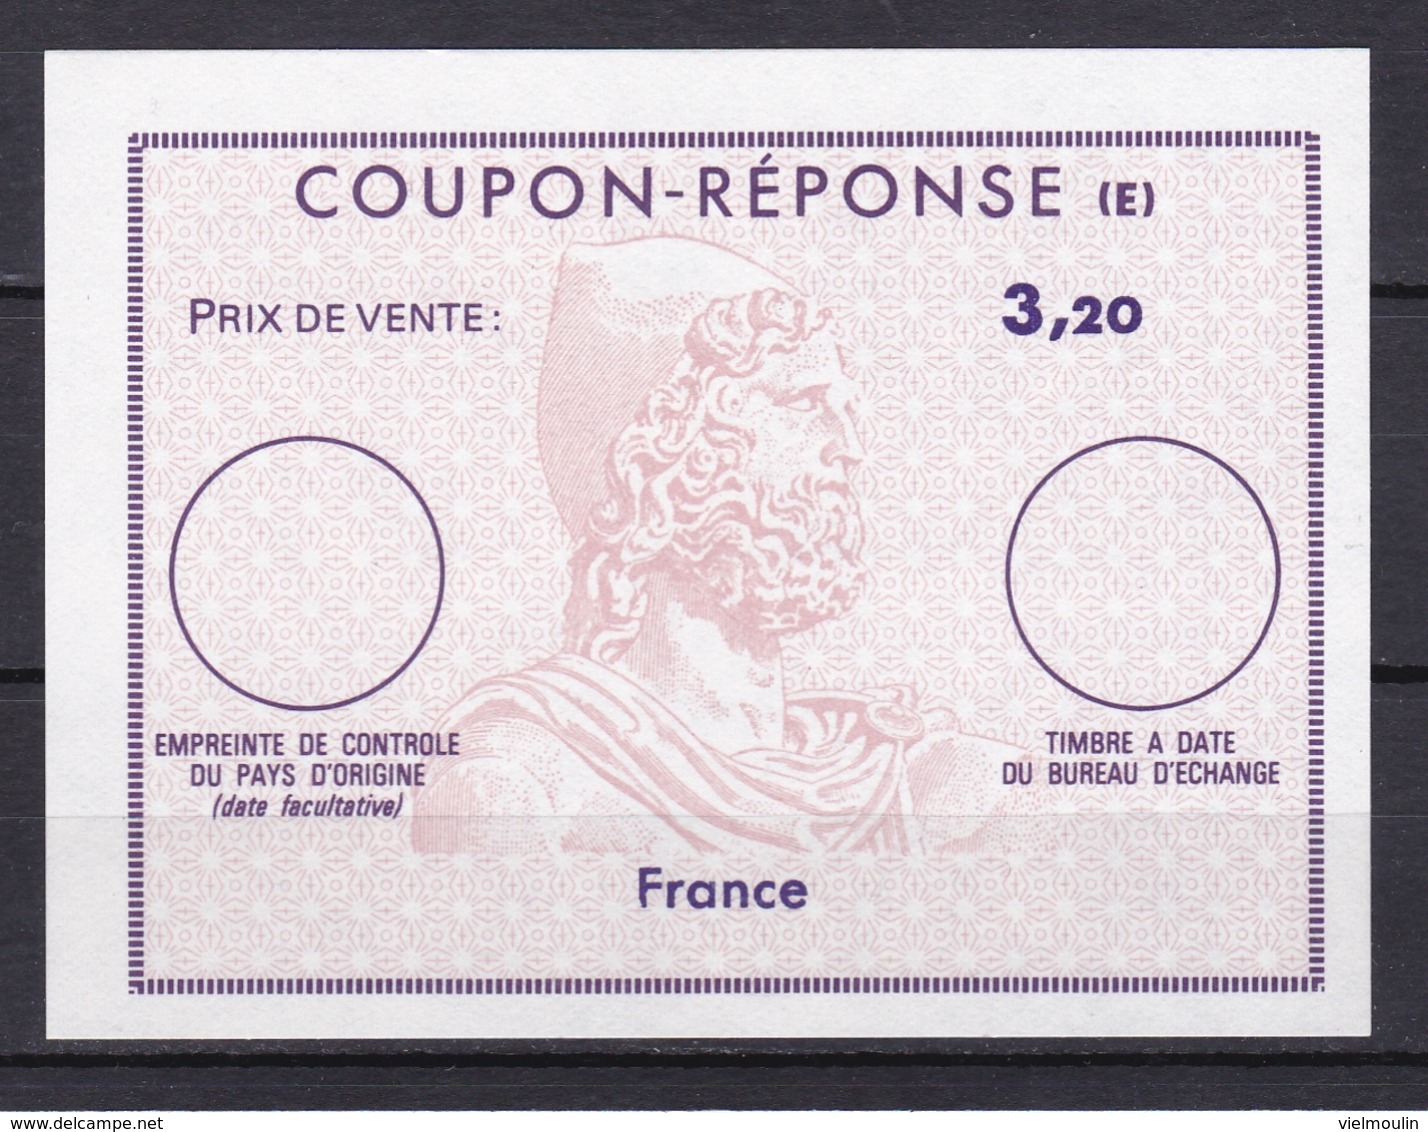 FRANCE - Type XII - 3,20 - COUPON-REPONSE (E) - Reply Coupon Reponse , - Militärische Franchisemarken